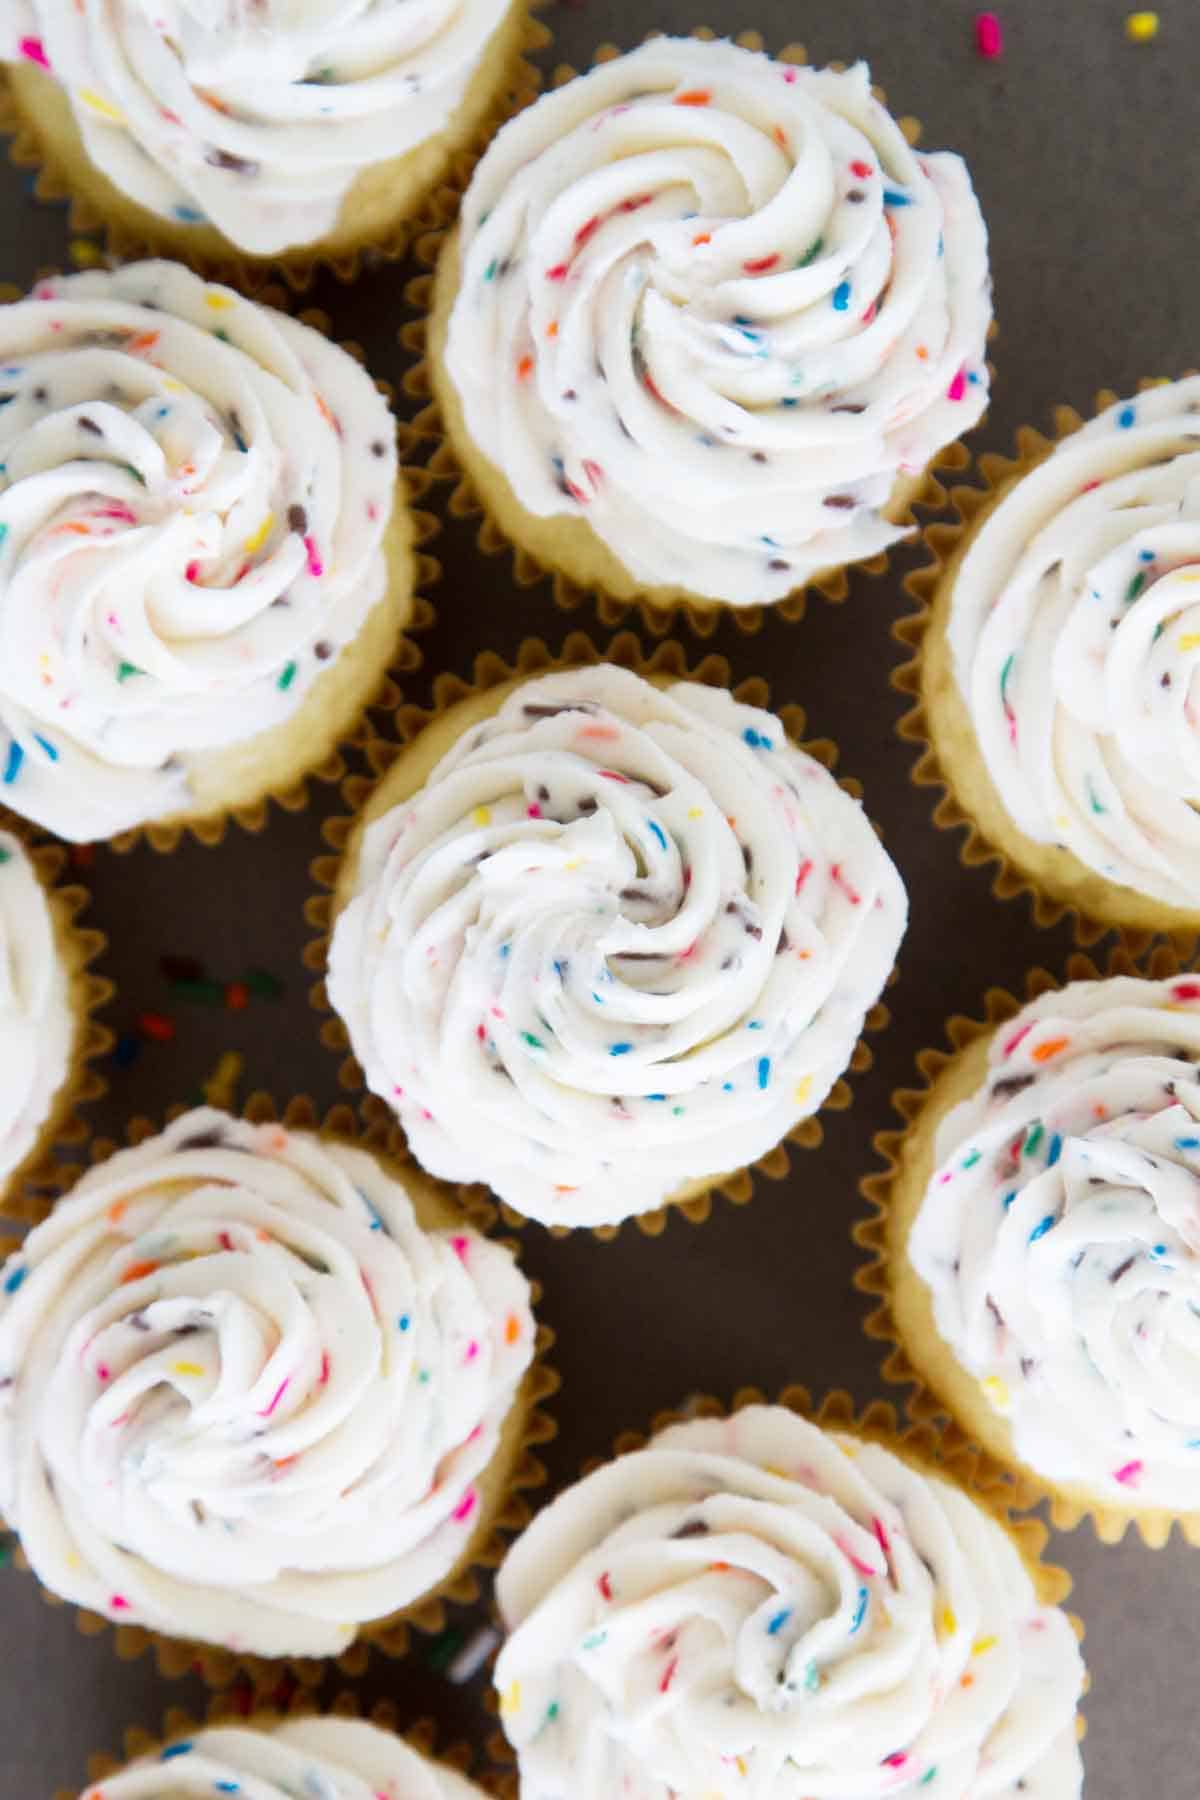 tops of cupcakes showing funfetti frosting